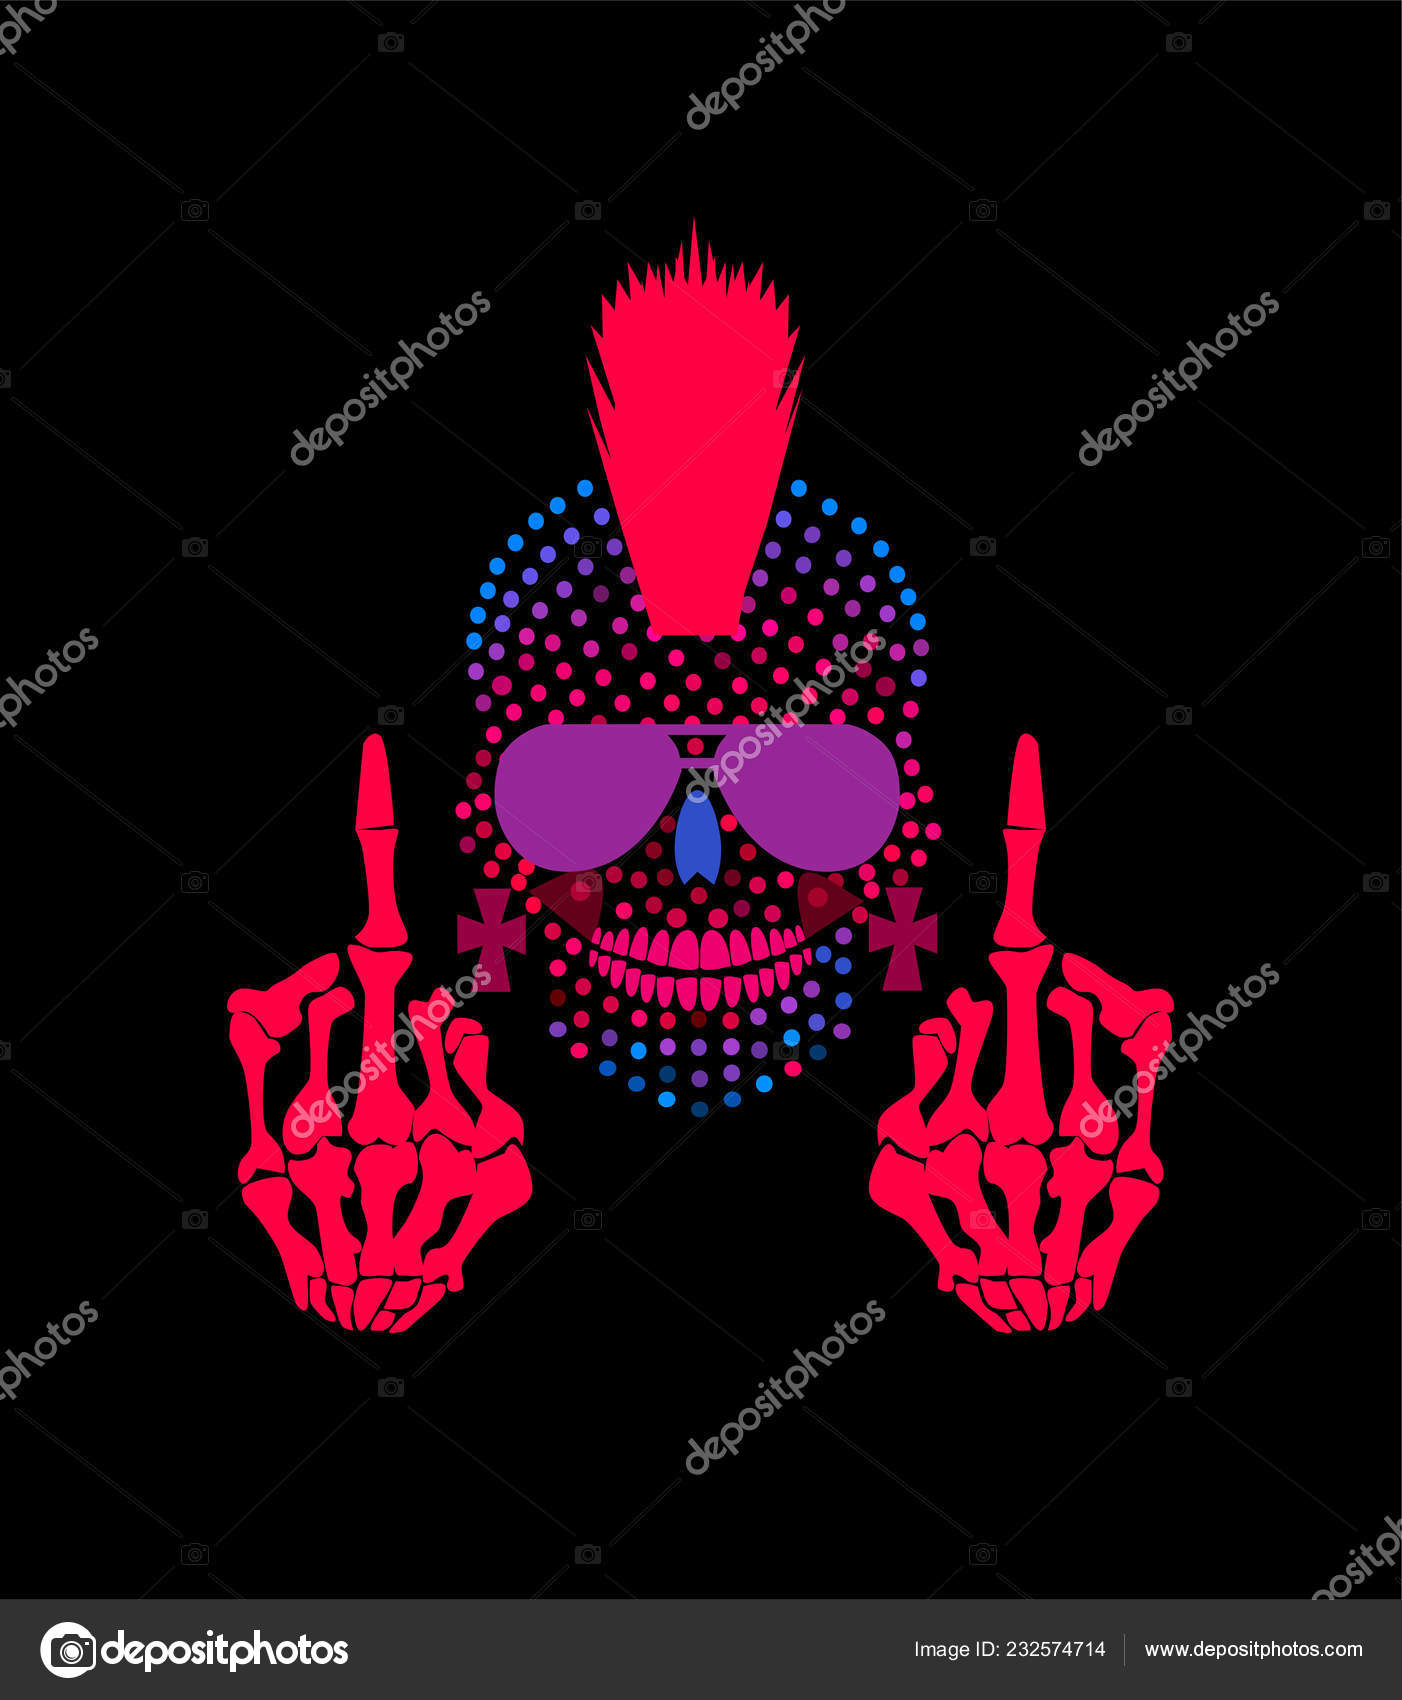 30 Skeleton Middle Finger Stock Photos Pictures  RoyaltyFree Images   iStock